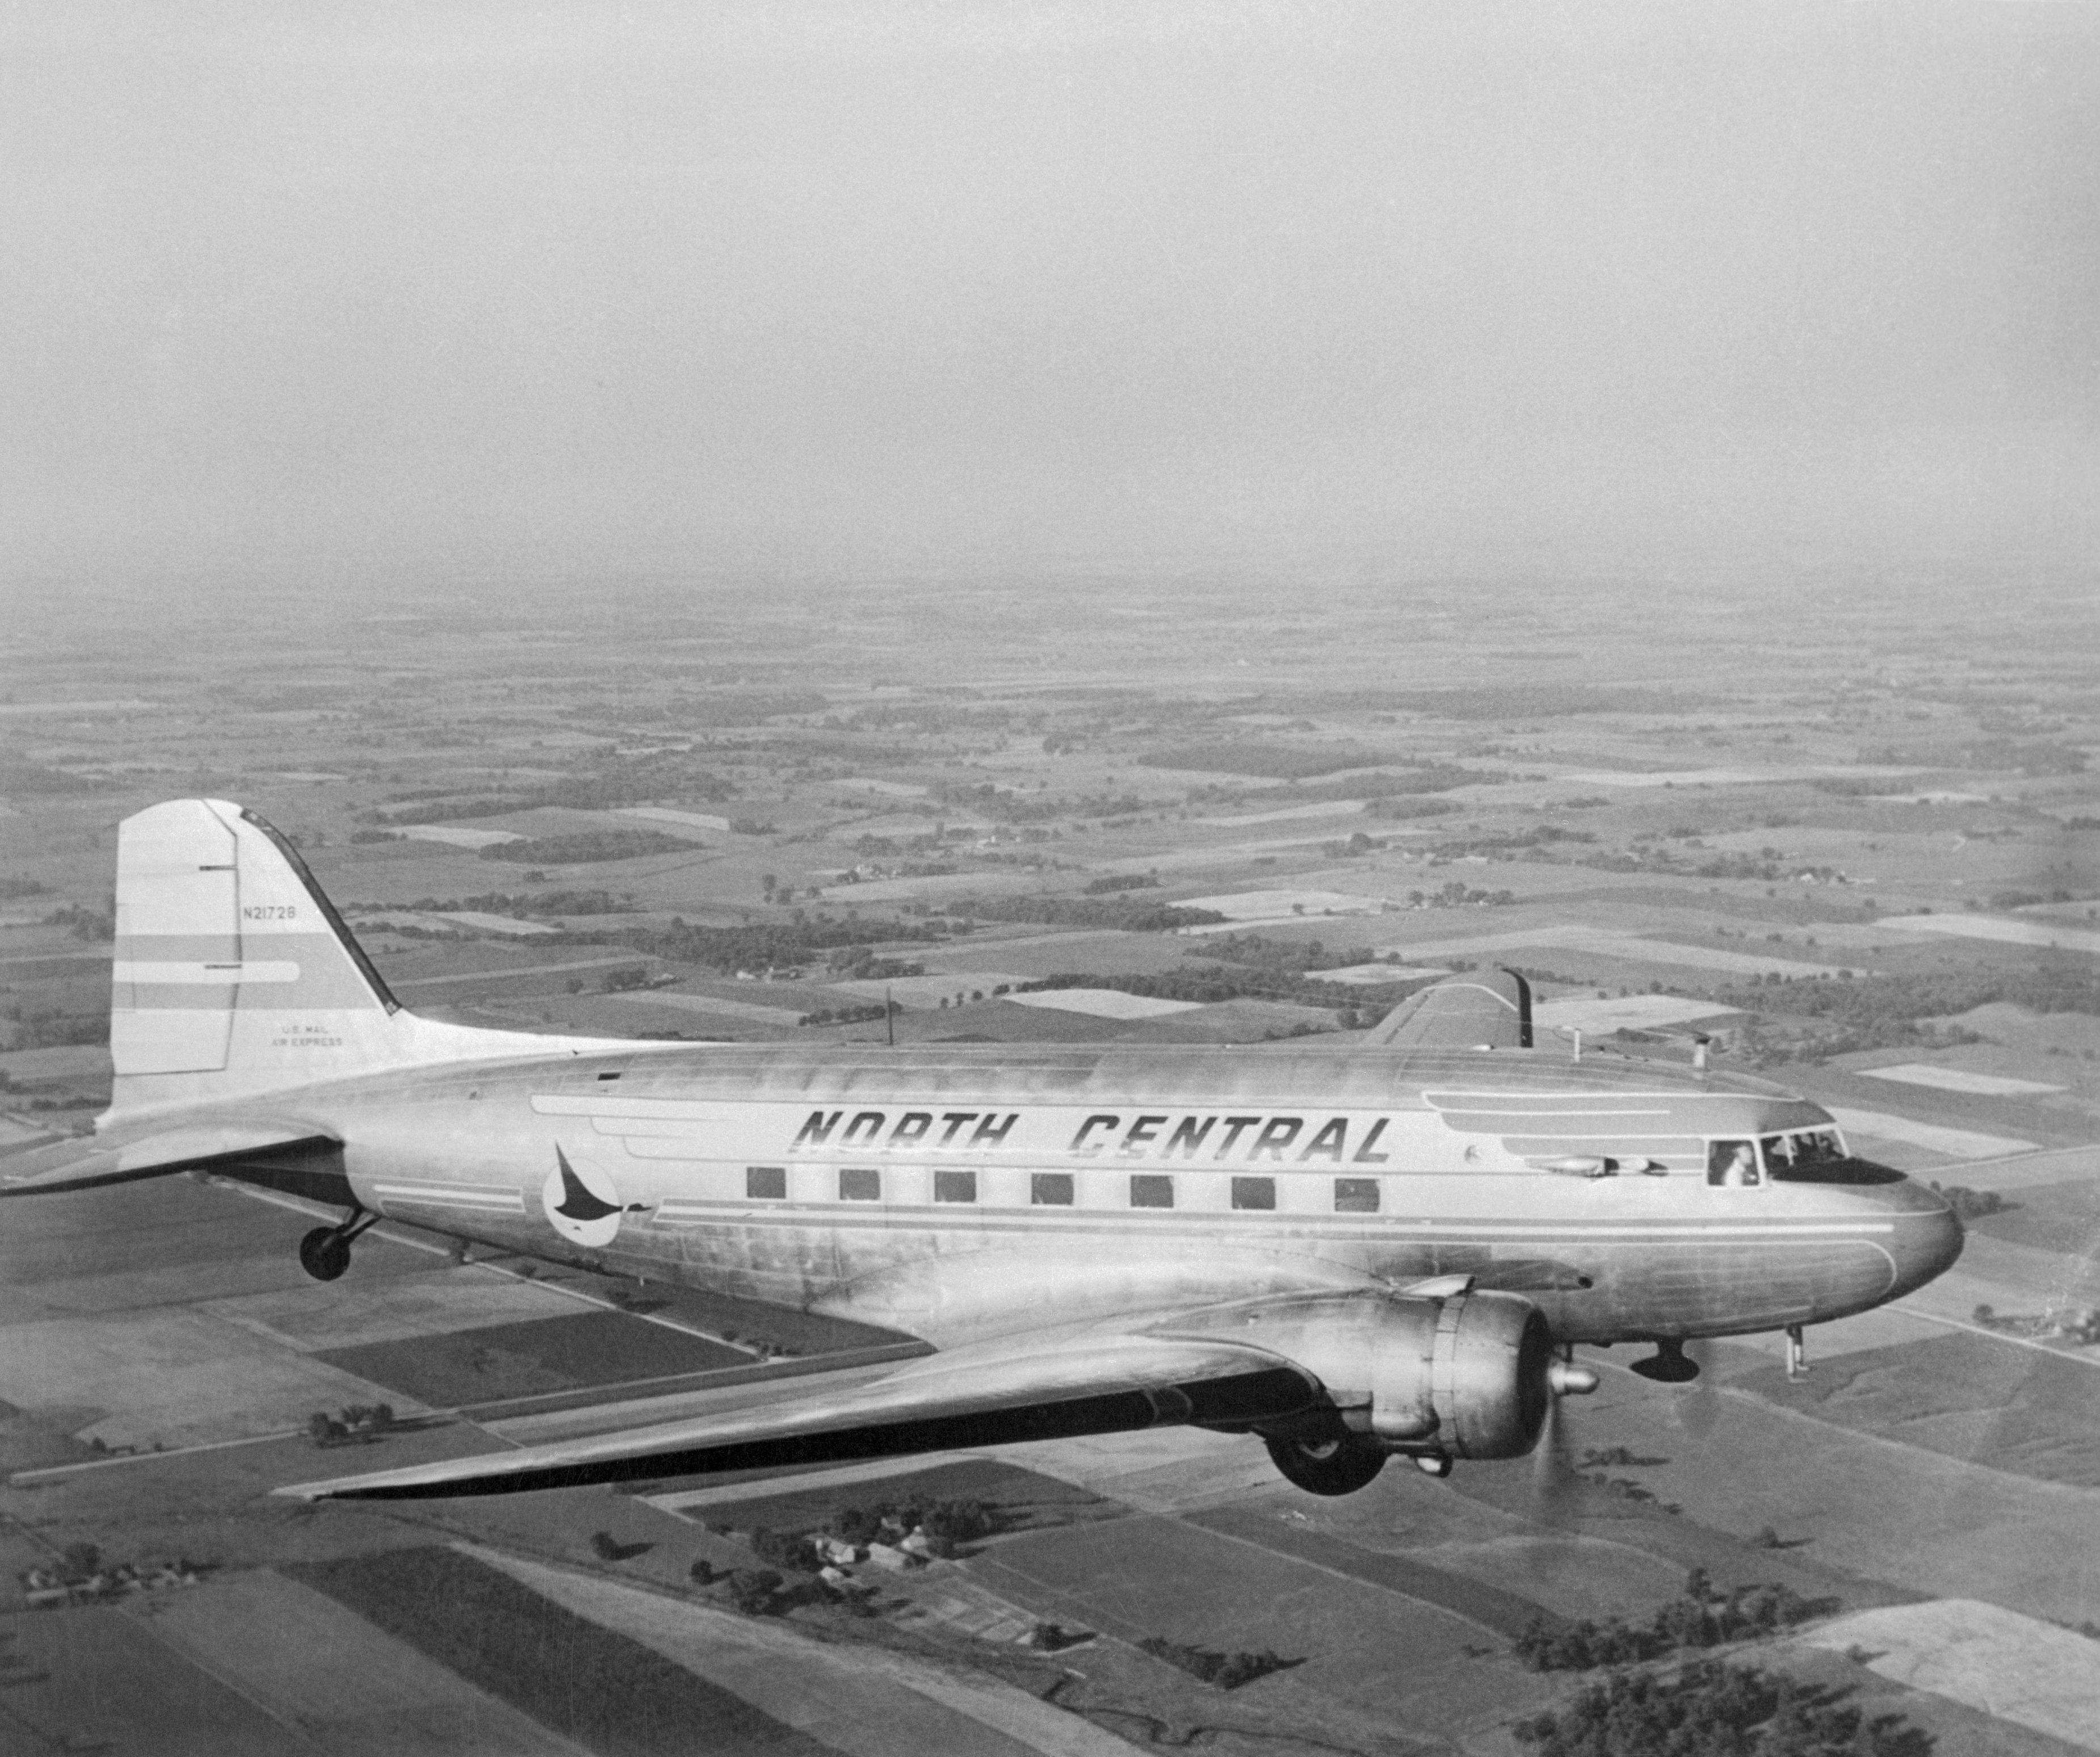 GettyImages-515550714 - Black and White of A Douglas DC-3 of North Central Airlines in flight by Getty Images